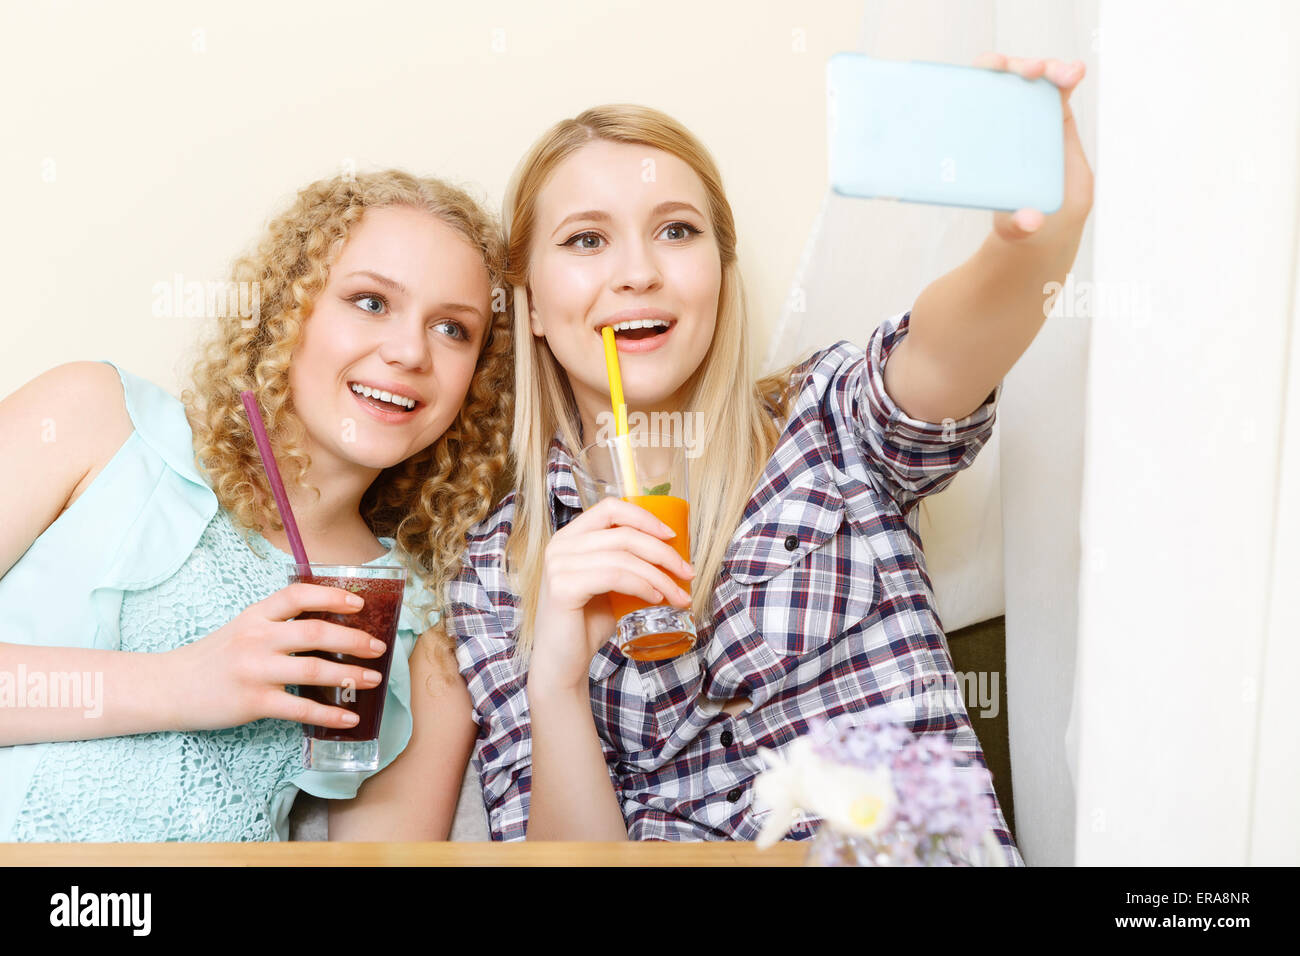 Two smiling girls doing selfie in cafe Stock Photo - Alamy